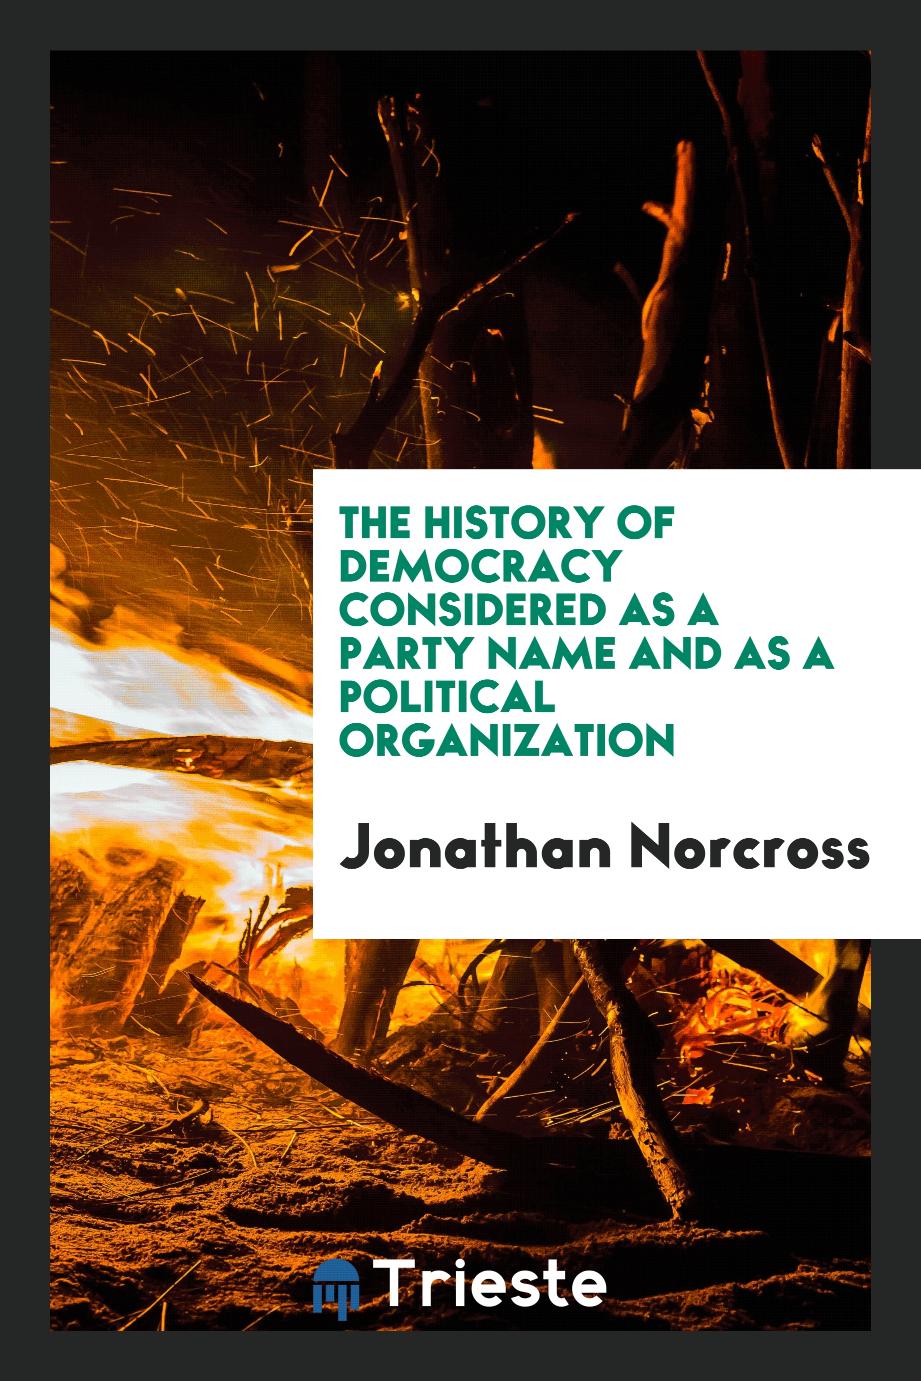 The History of Democracy Considered as a Party Name and as a Political Organization